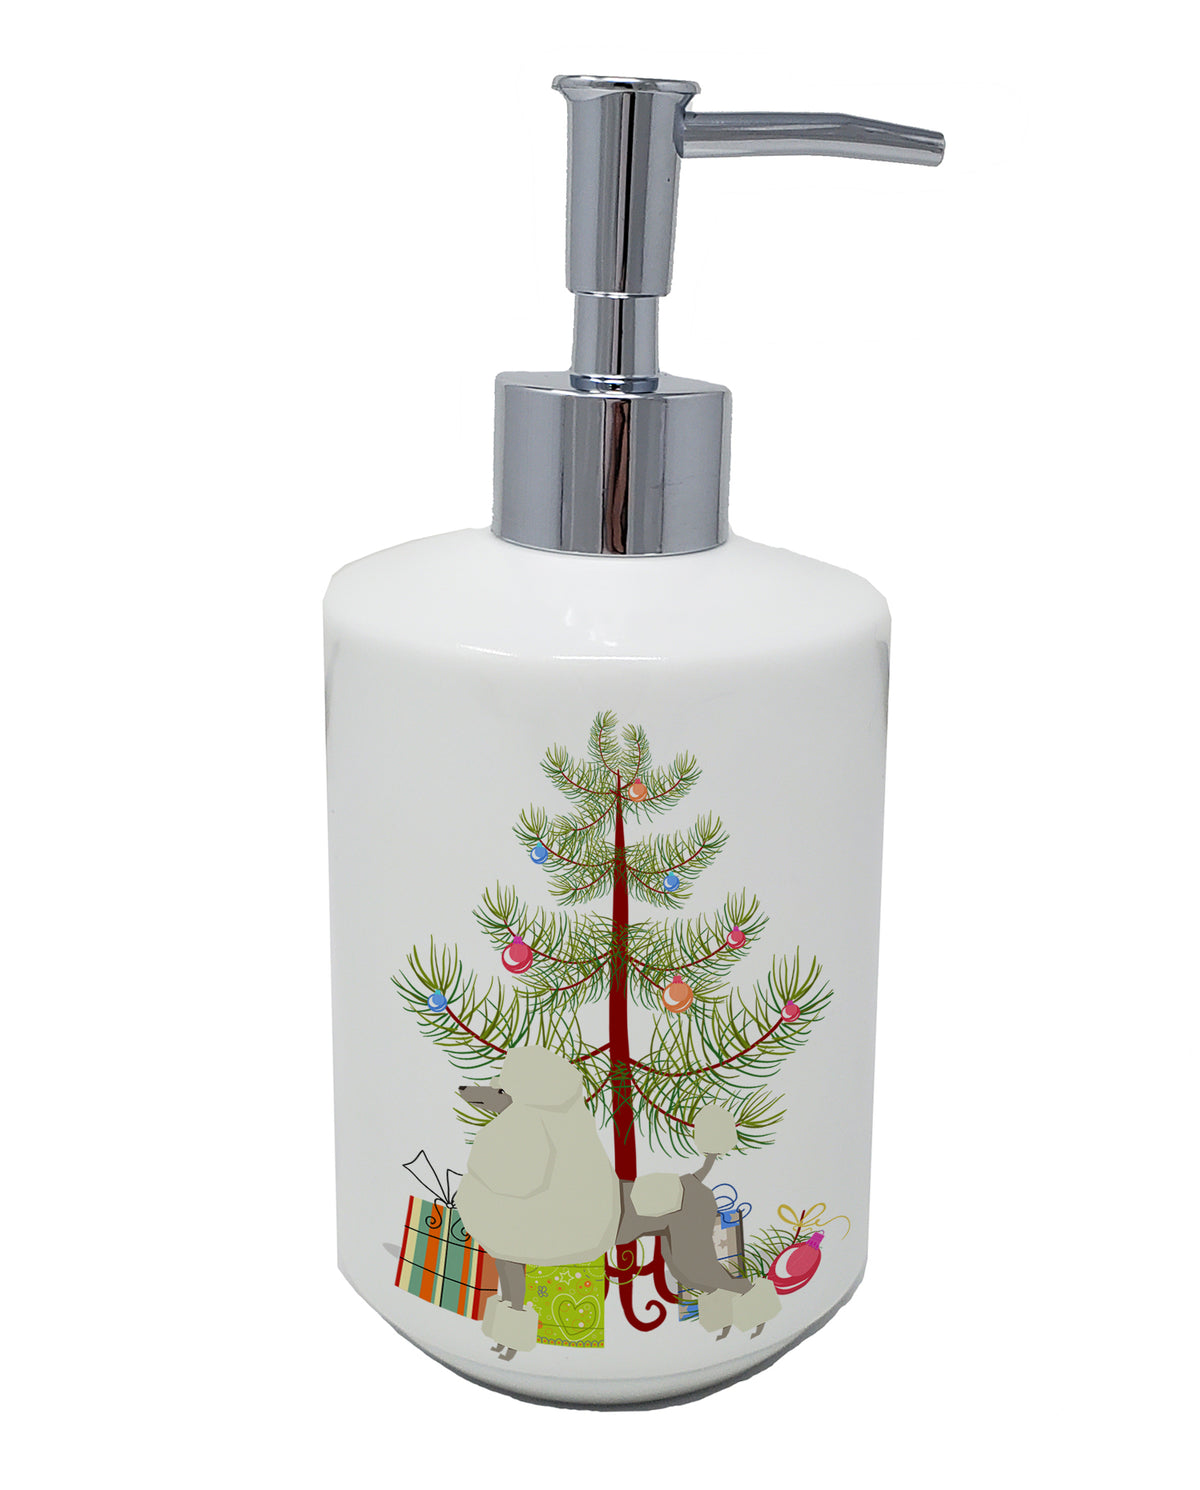 Buy this Poodle Christmas Tree Ceramic Soap Dispenser